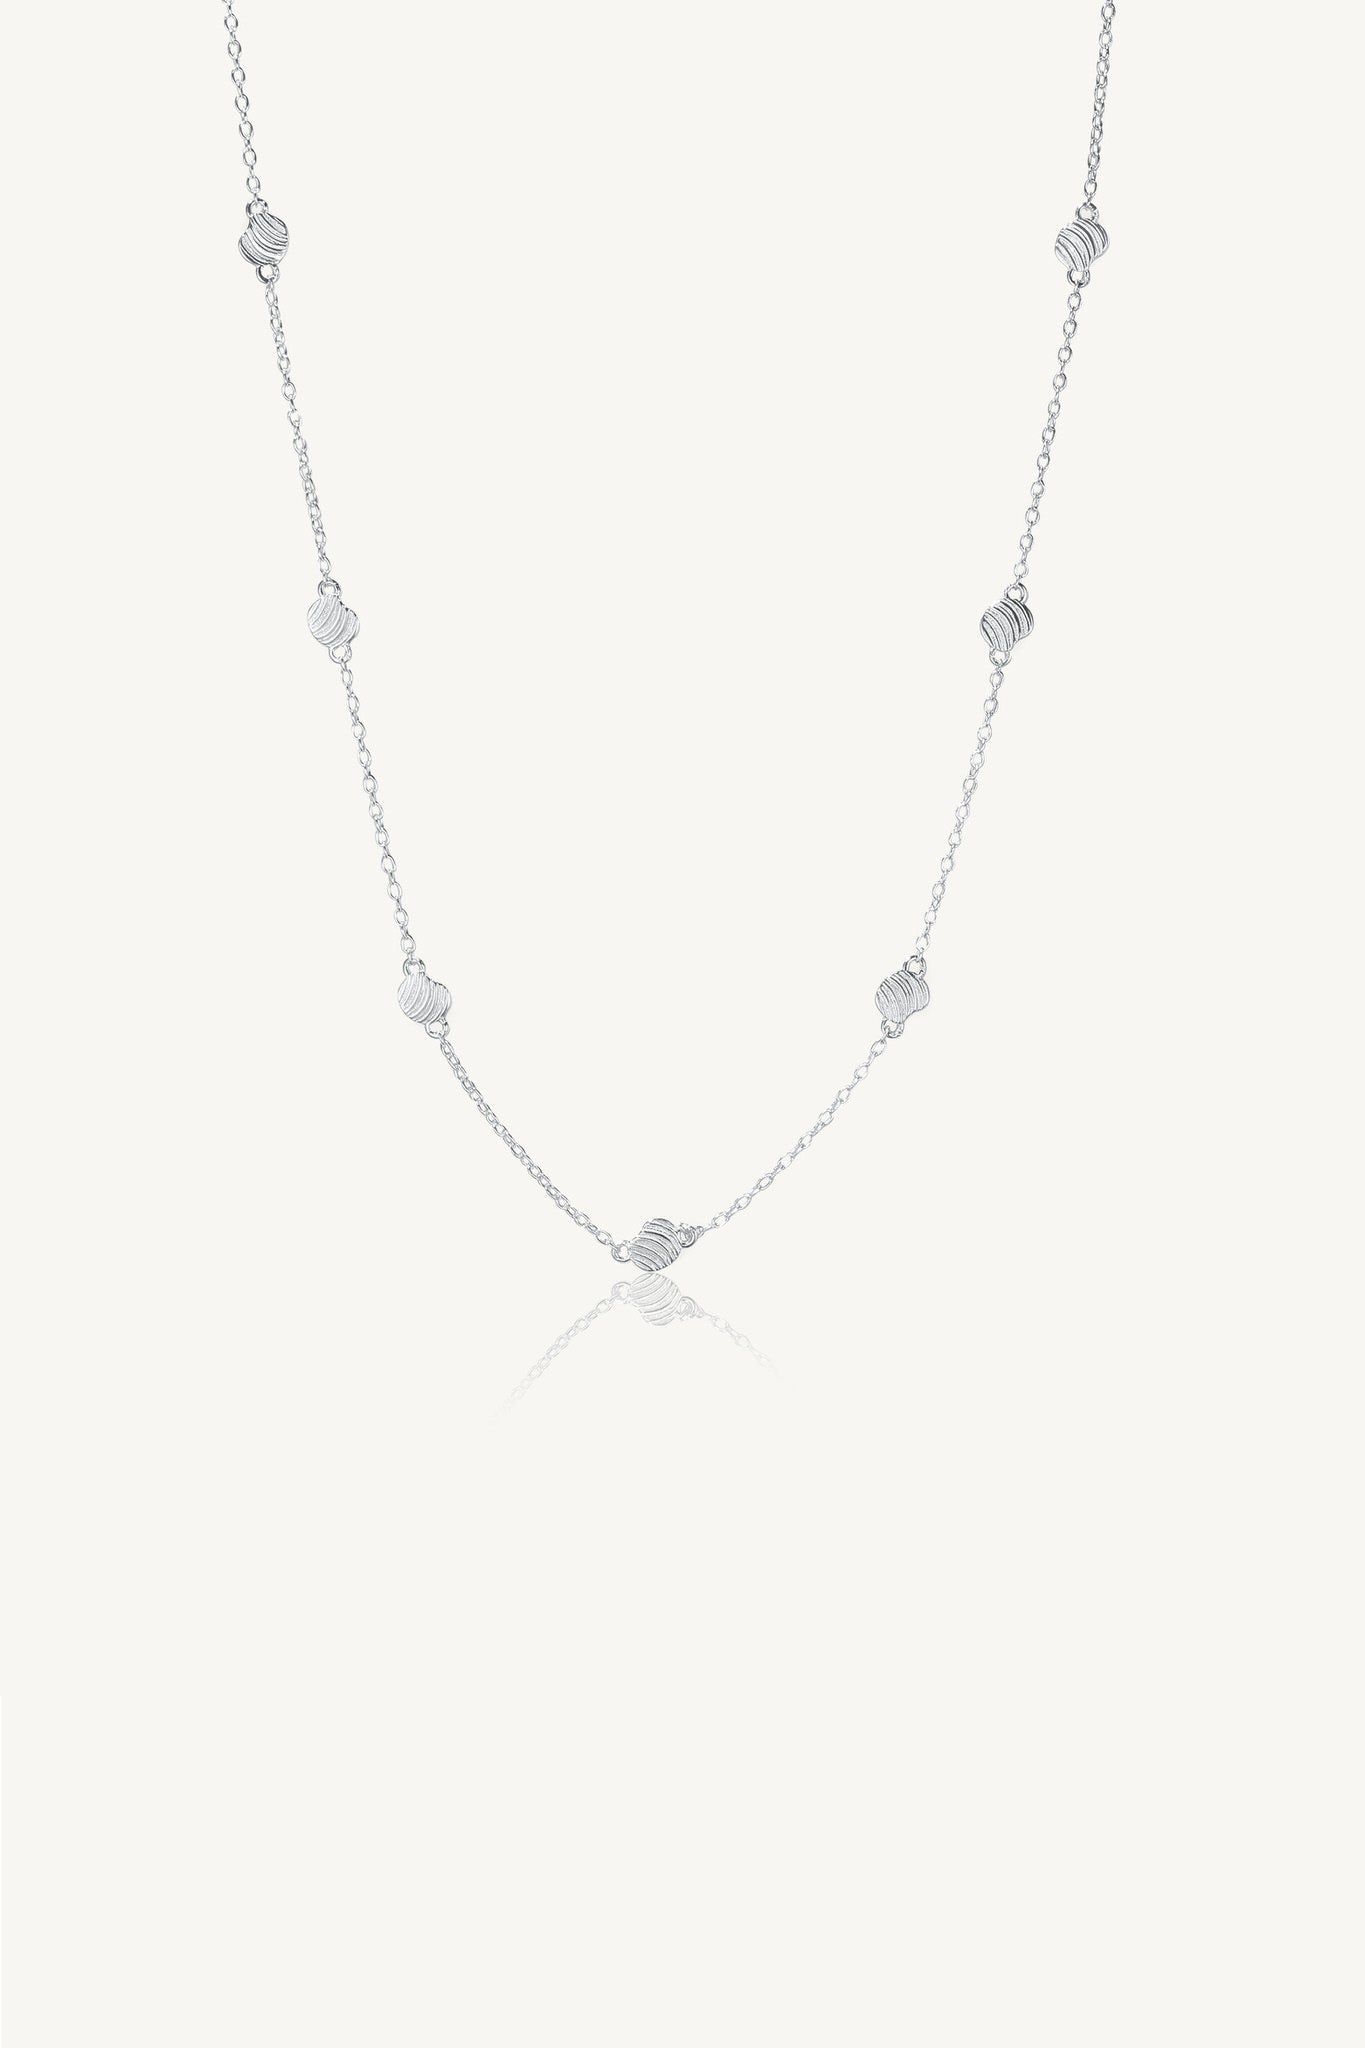 Engraved Shell Lines Chain Necklace Sterling Silver